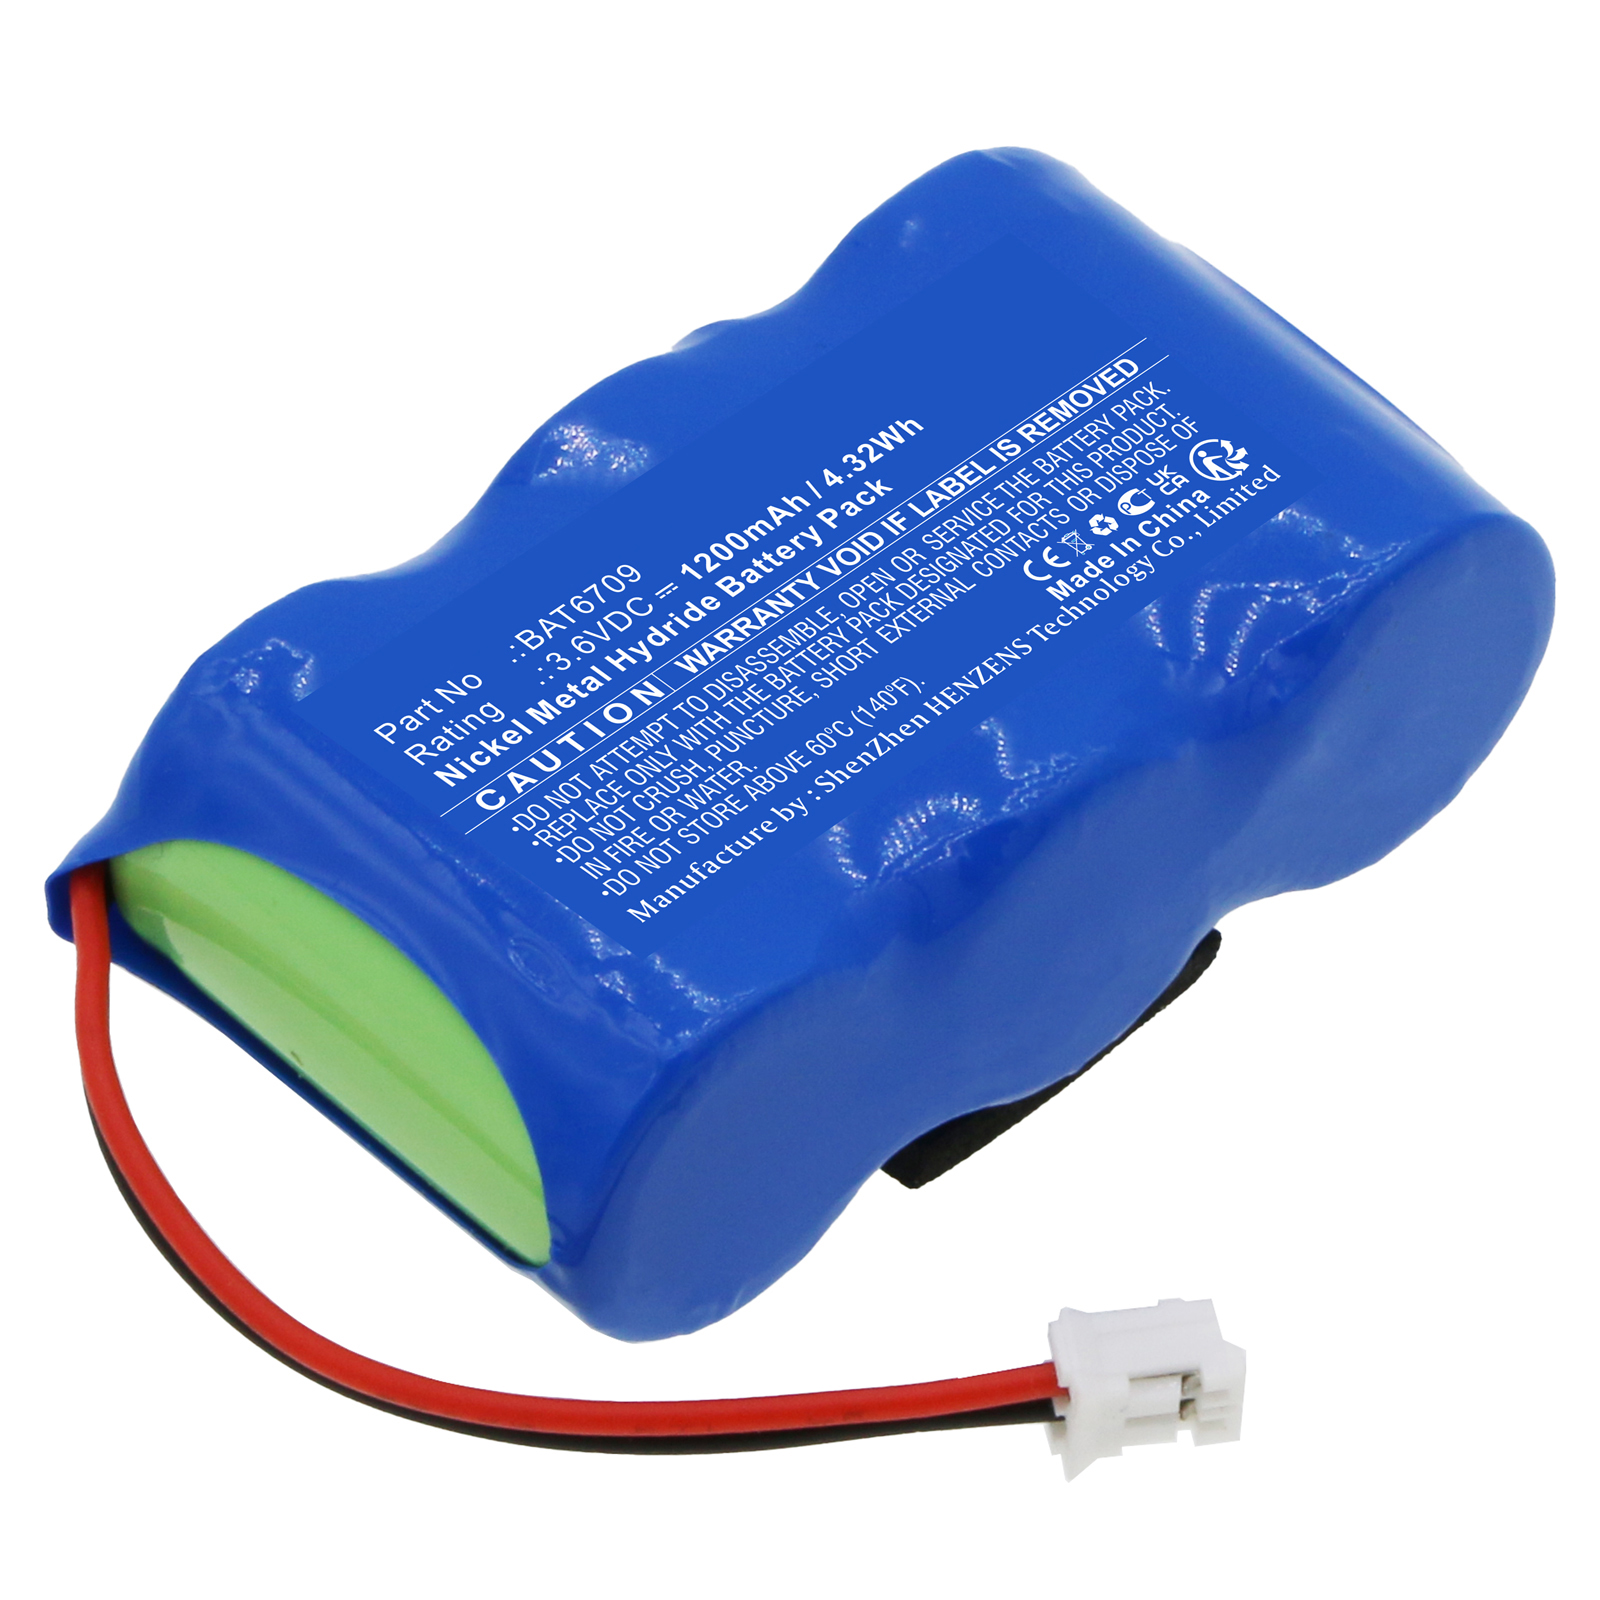 Synergy Digital Medical Battery, Compatible with Micro Medical BAT6709 Medical Battery (Ni-MH, 3.6V, 1200mAh)